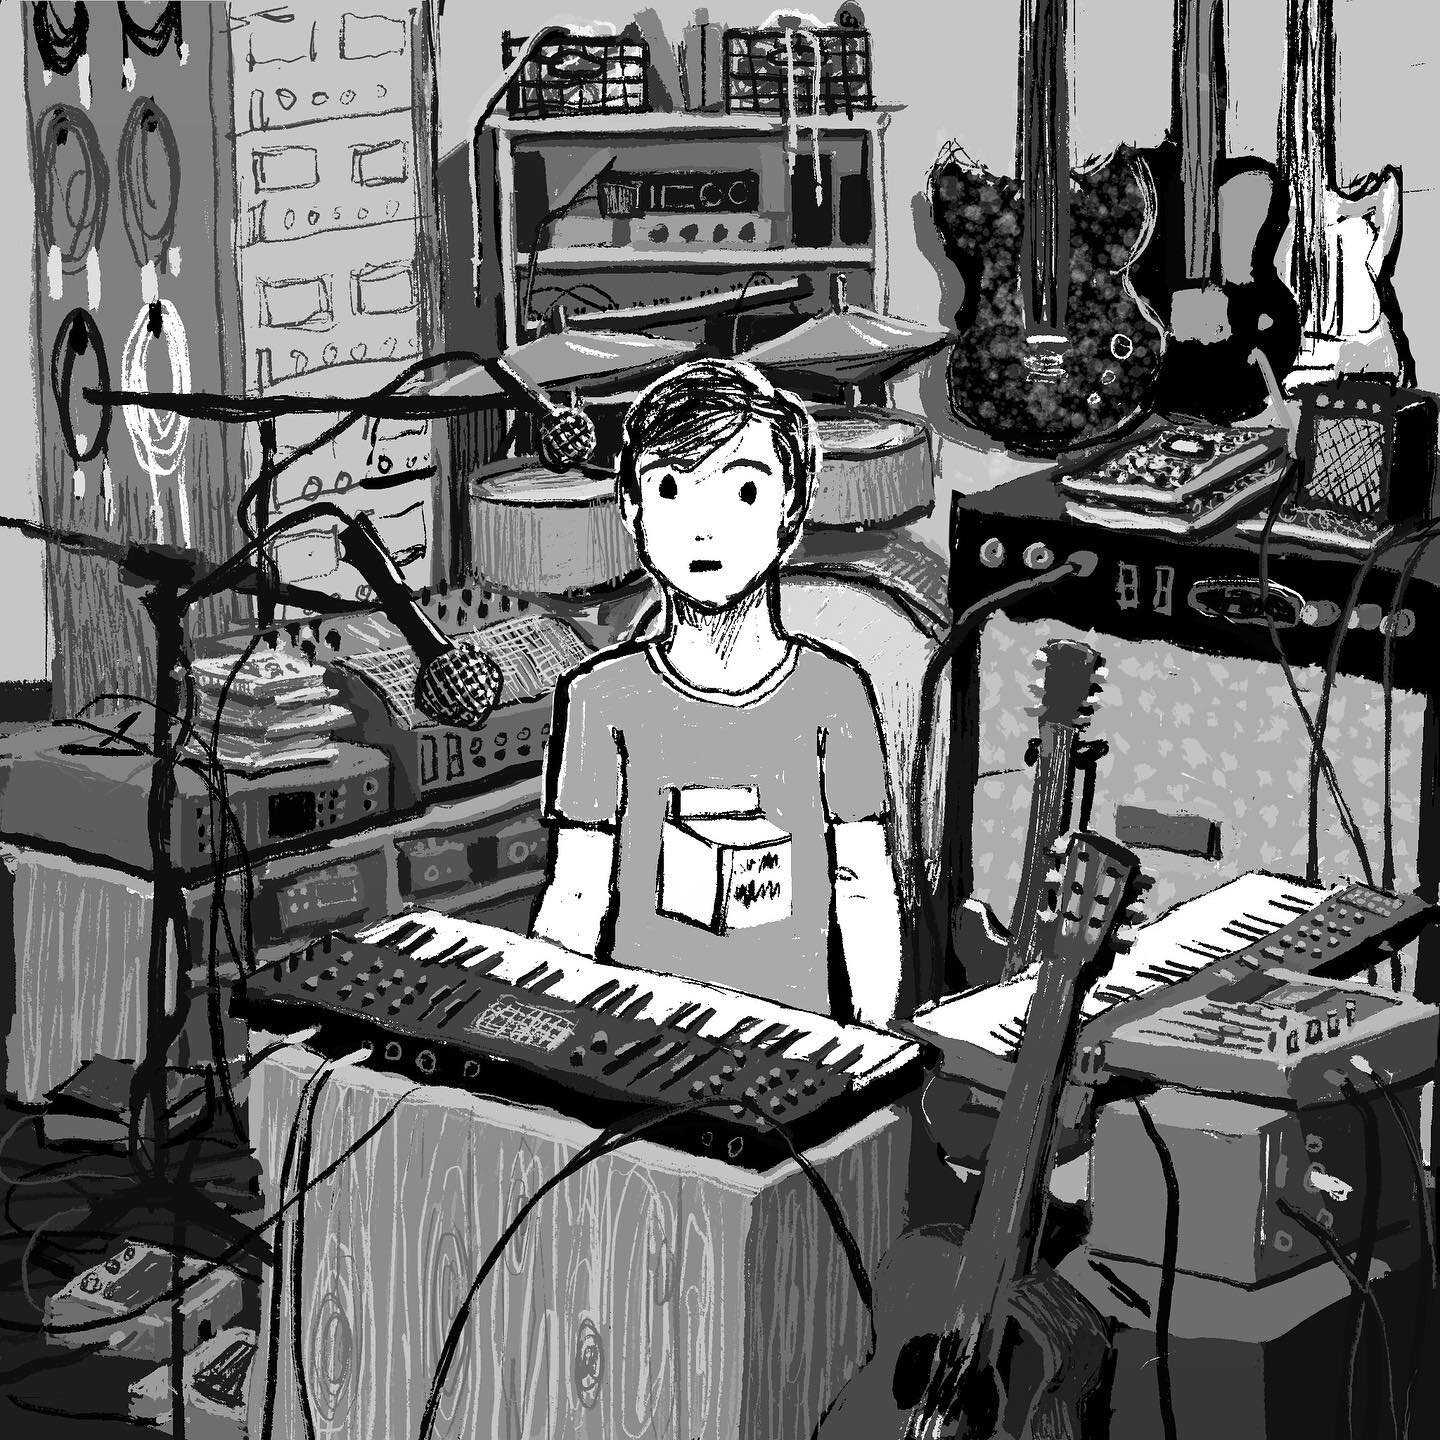 GEAR for #inktober  Jon in his natural habitat 💙 Also the reason we will never get a tiny house.

@inktober #musicstudio #musicgear #gear #musicianlifestyle #tinyhouses #baltimoremusic #baltimoreartist #homestudio #sonicyouth @atomicmusic @musicgoro